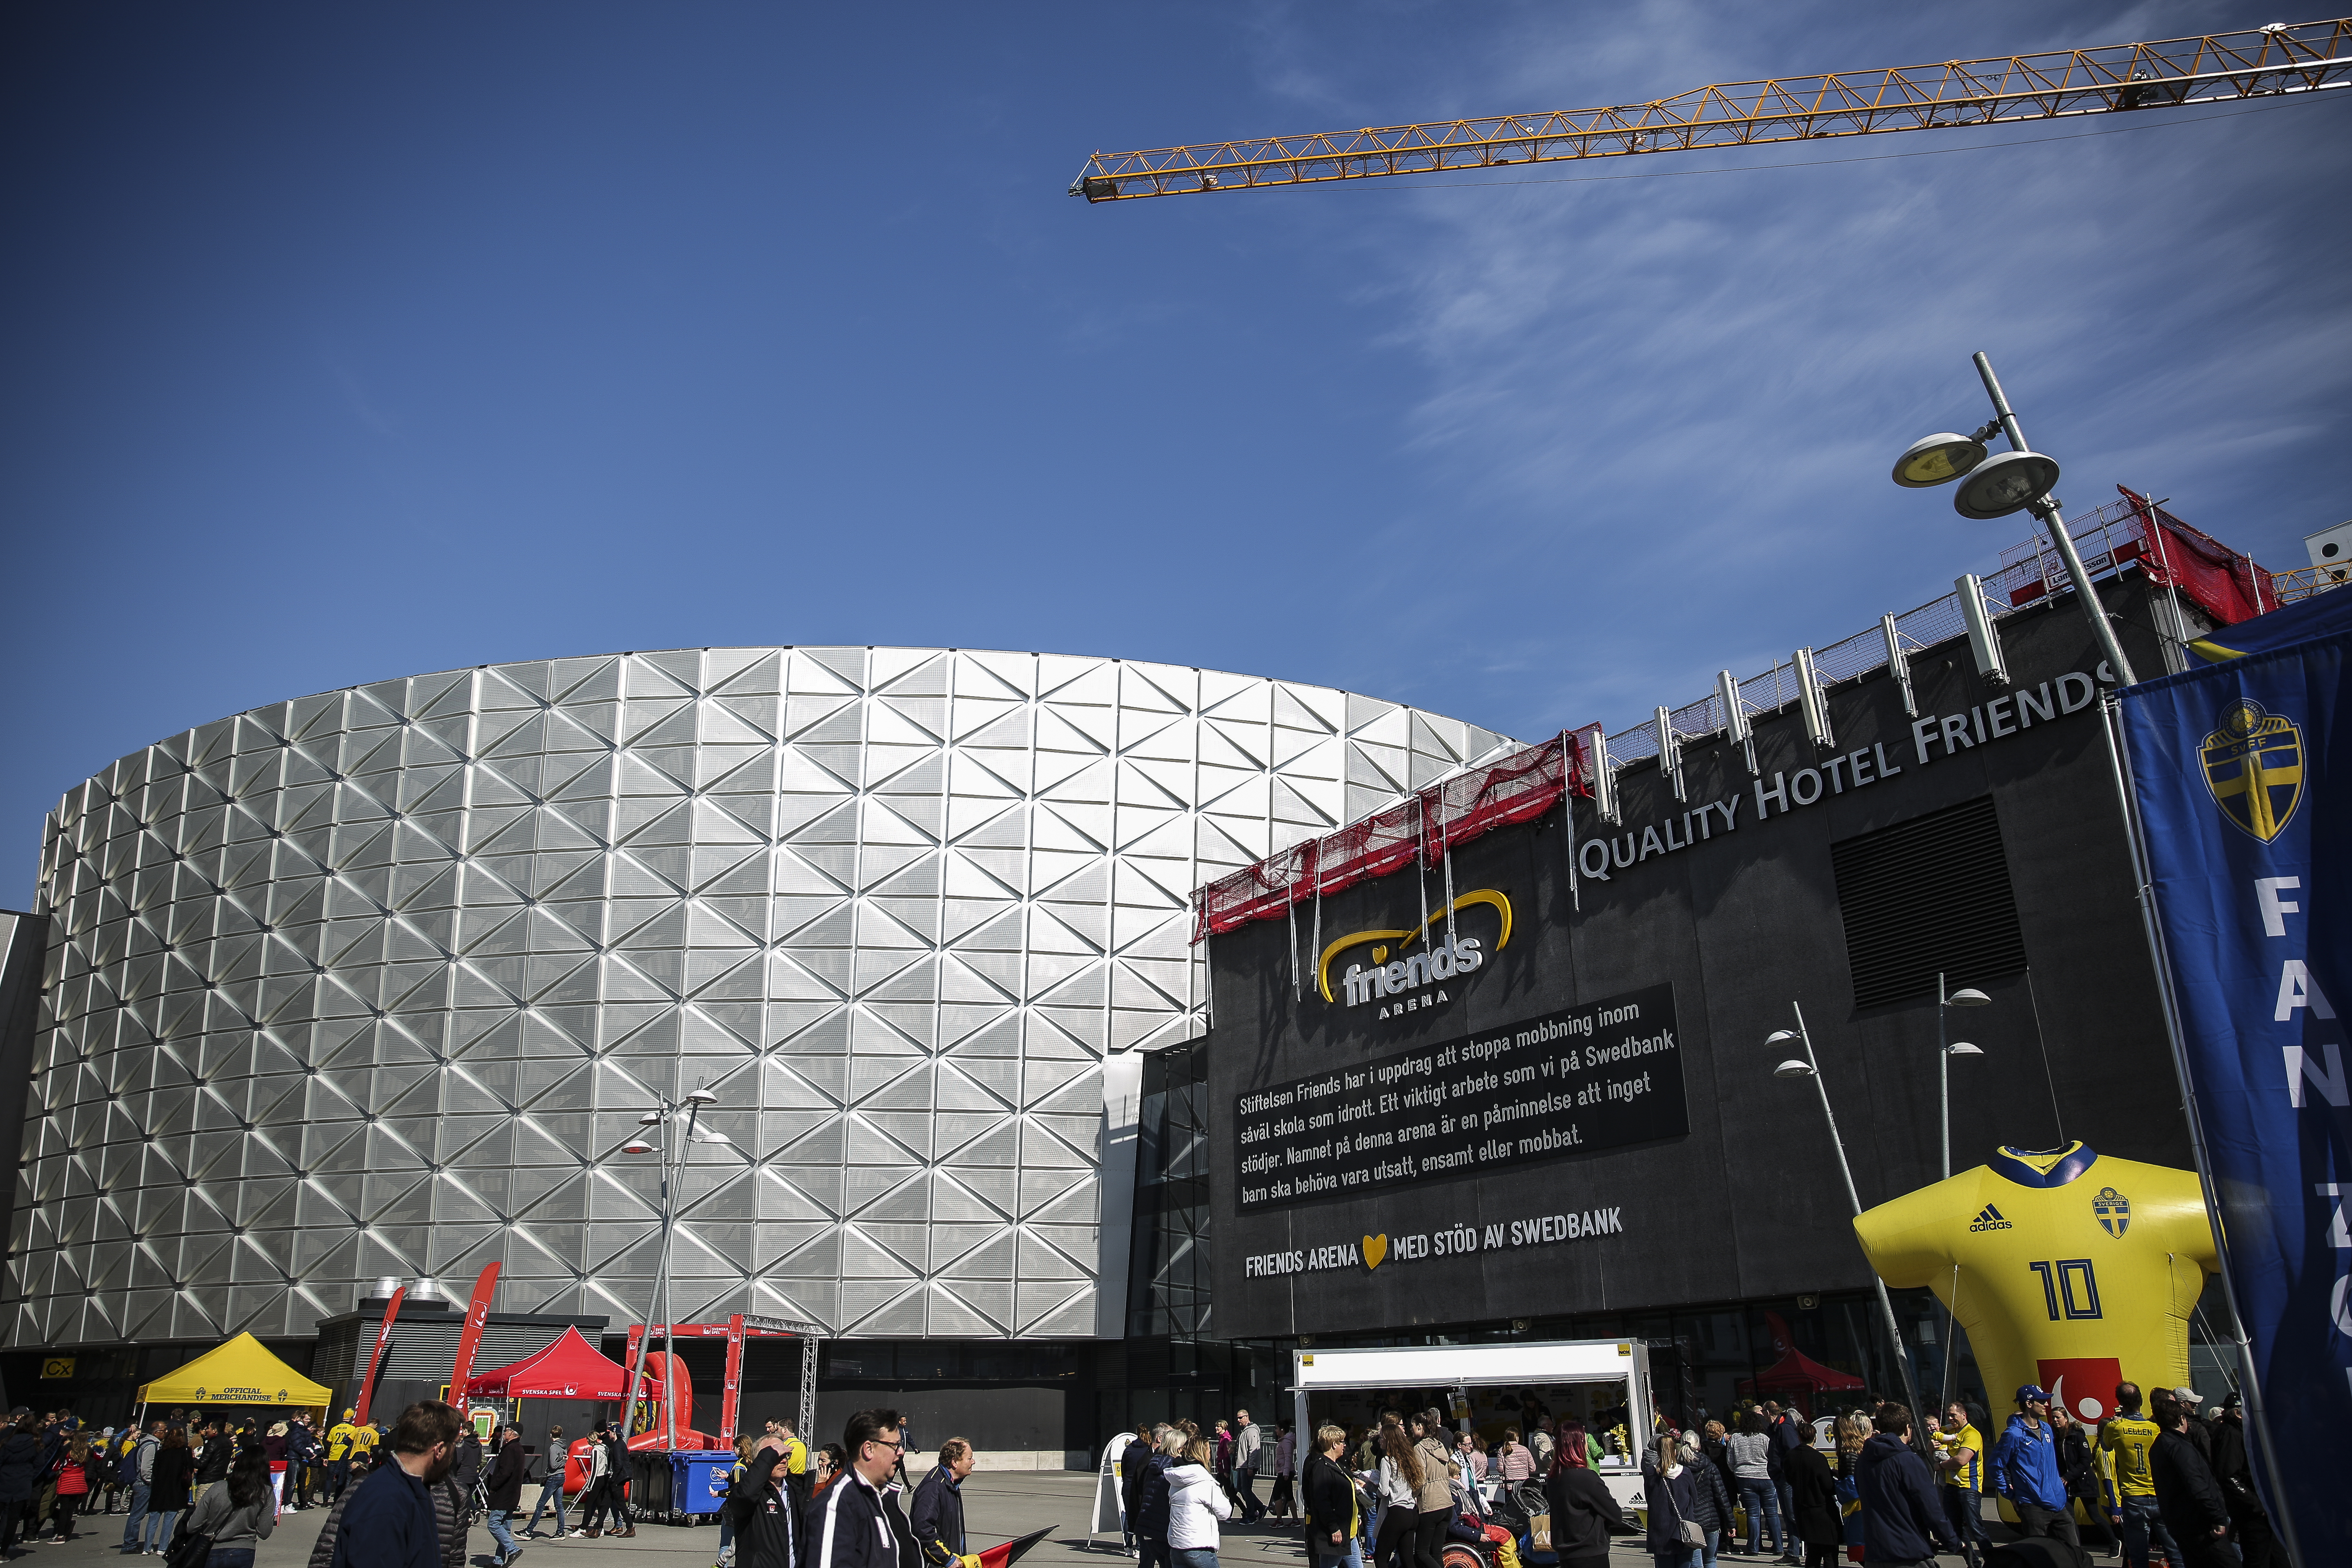 SOLNA, SWEDEN - APRIL 06: General view of Friends arena prior to the Sweden v Germany Women's International Friendly match at Friends arena on April 06, 2019 in Solna, Sweden. (Photo by Maja Hitij/Bongarts/Getty Images)